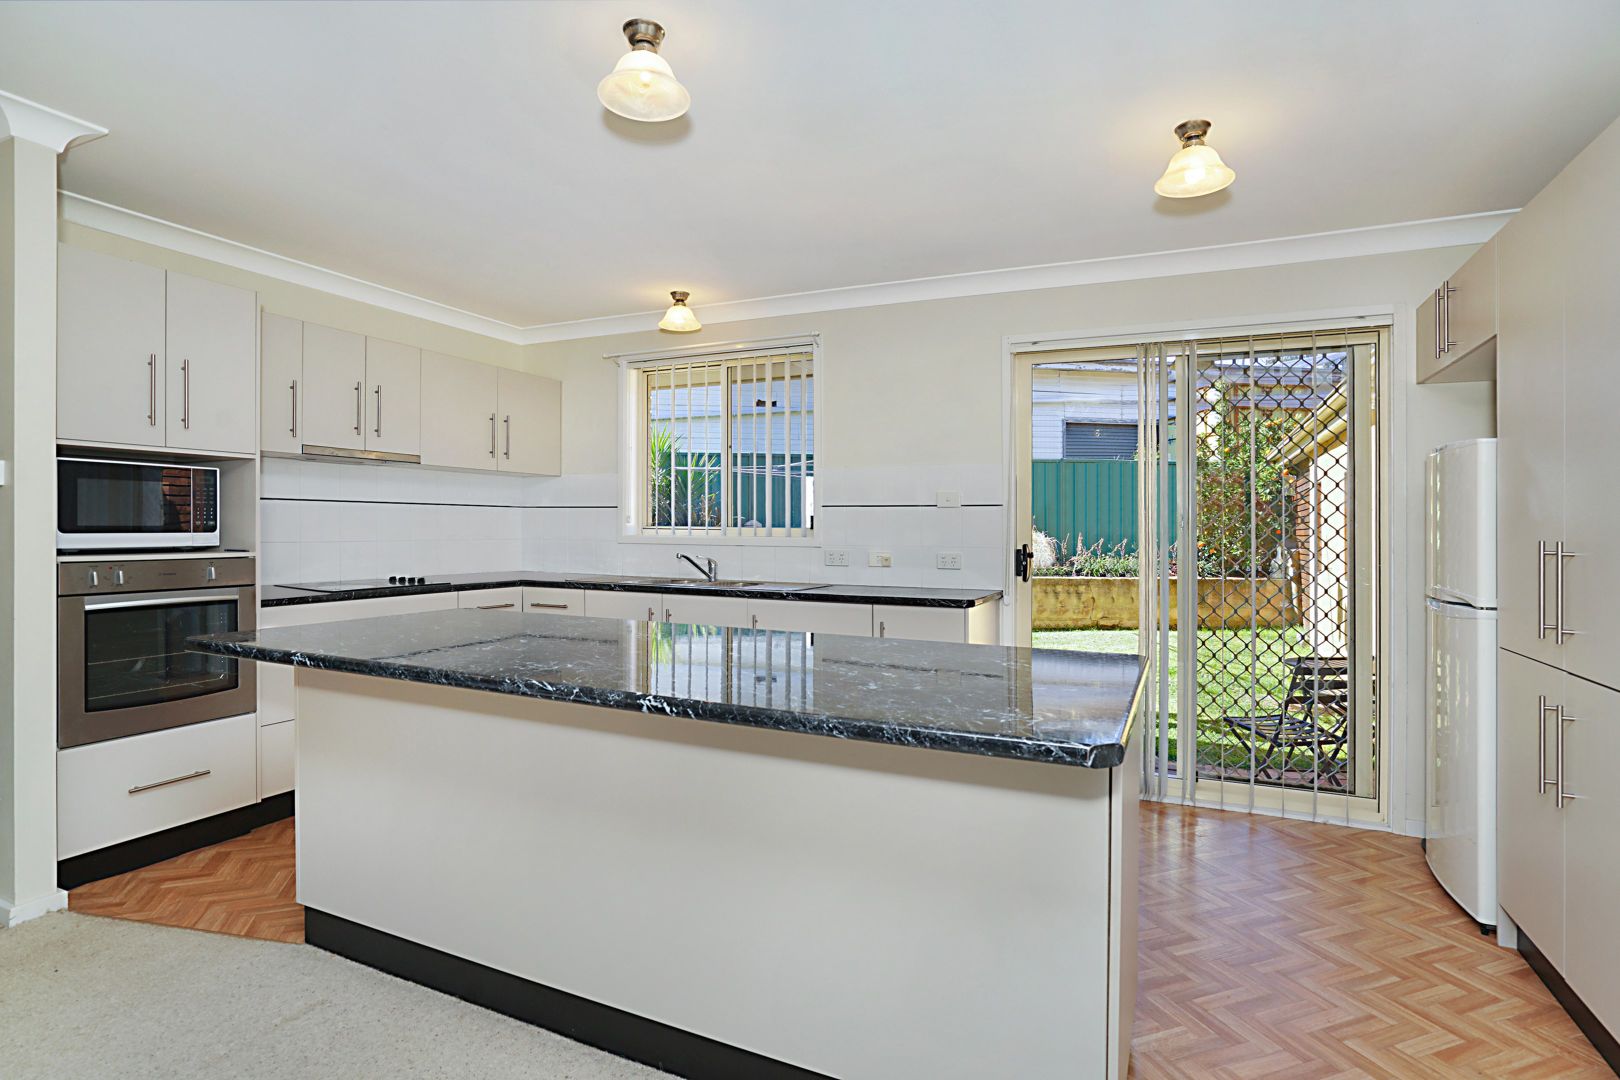 3 and 3a Deaves Road, Cooranbong NSW 2265, Image 1